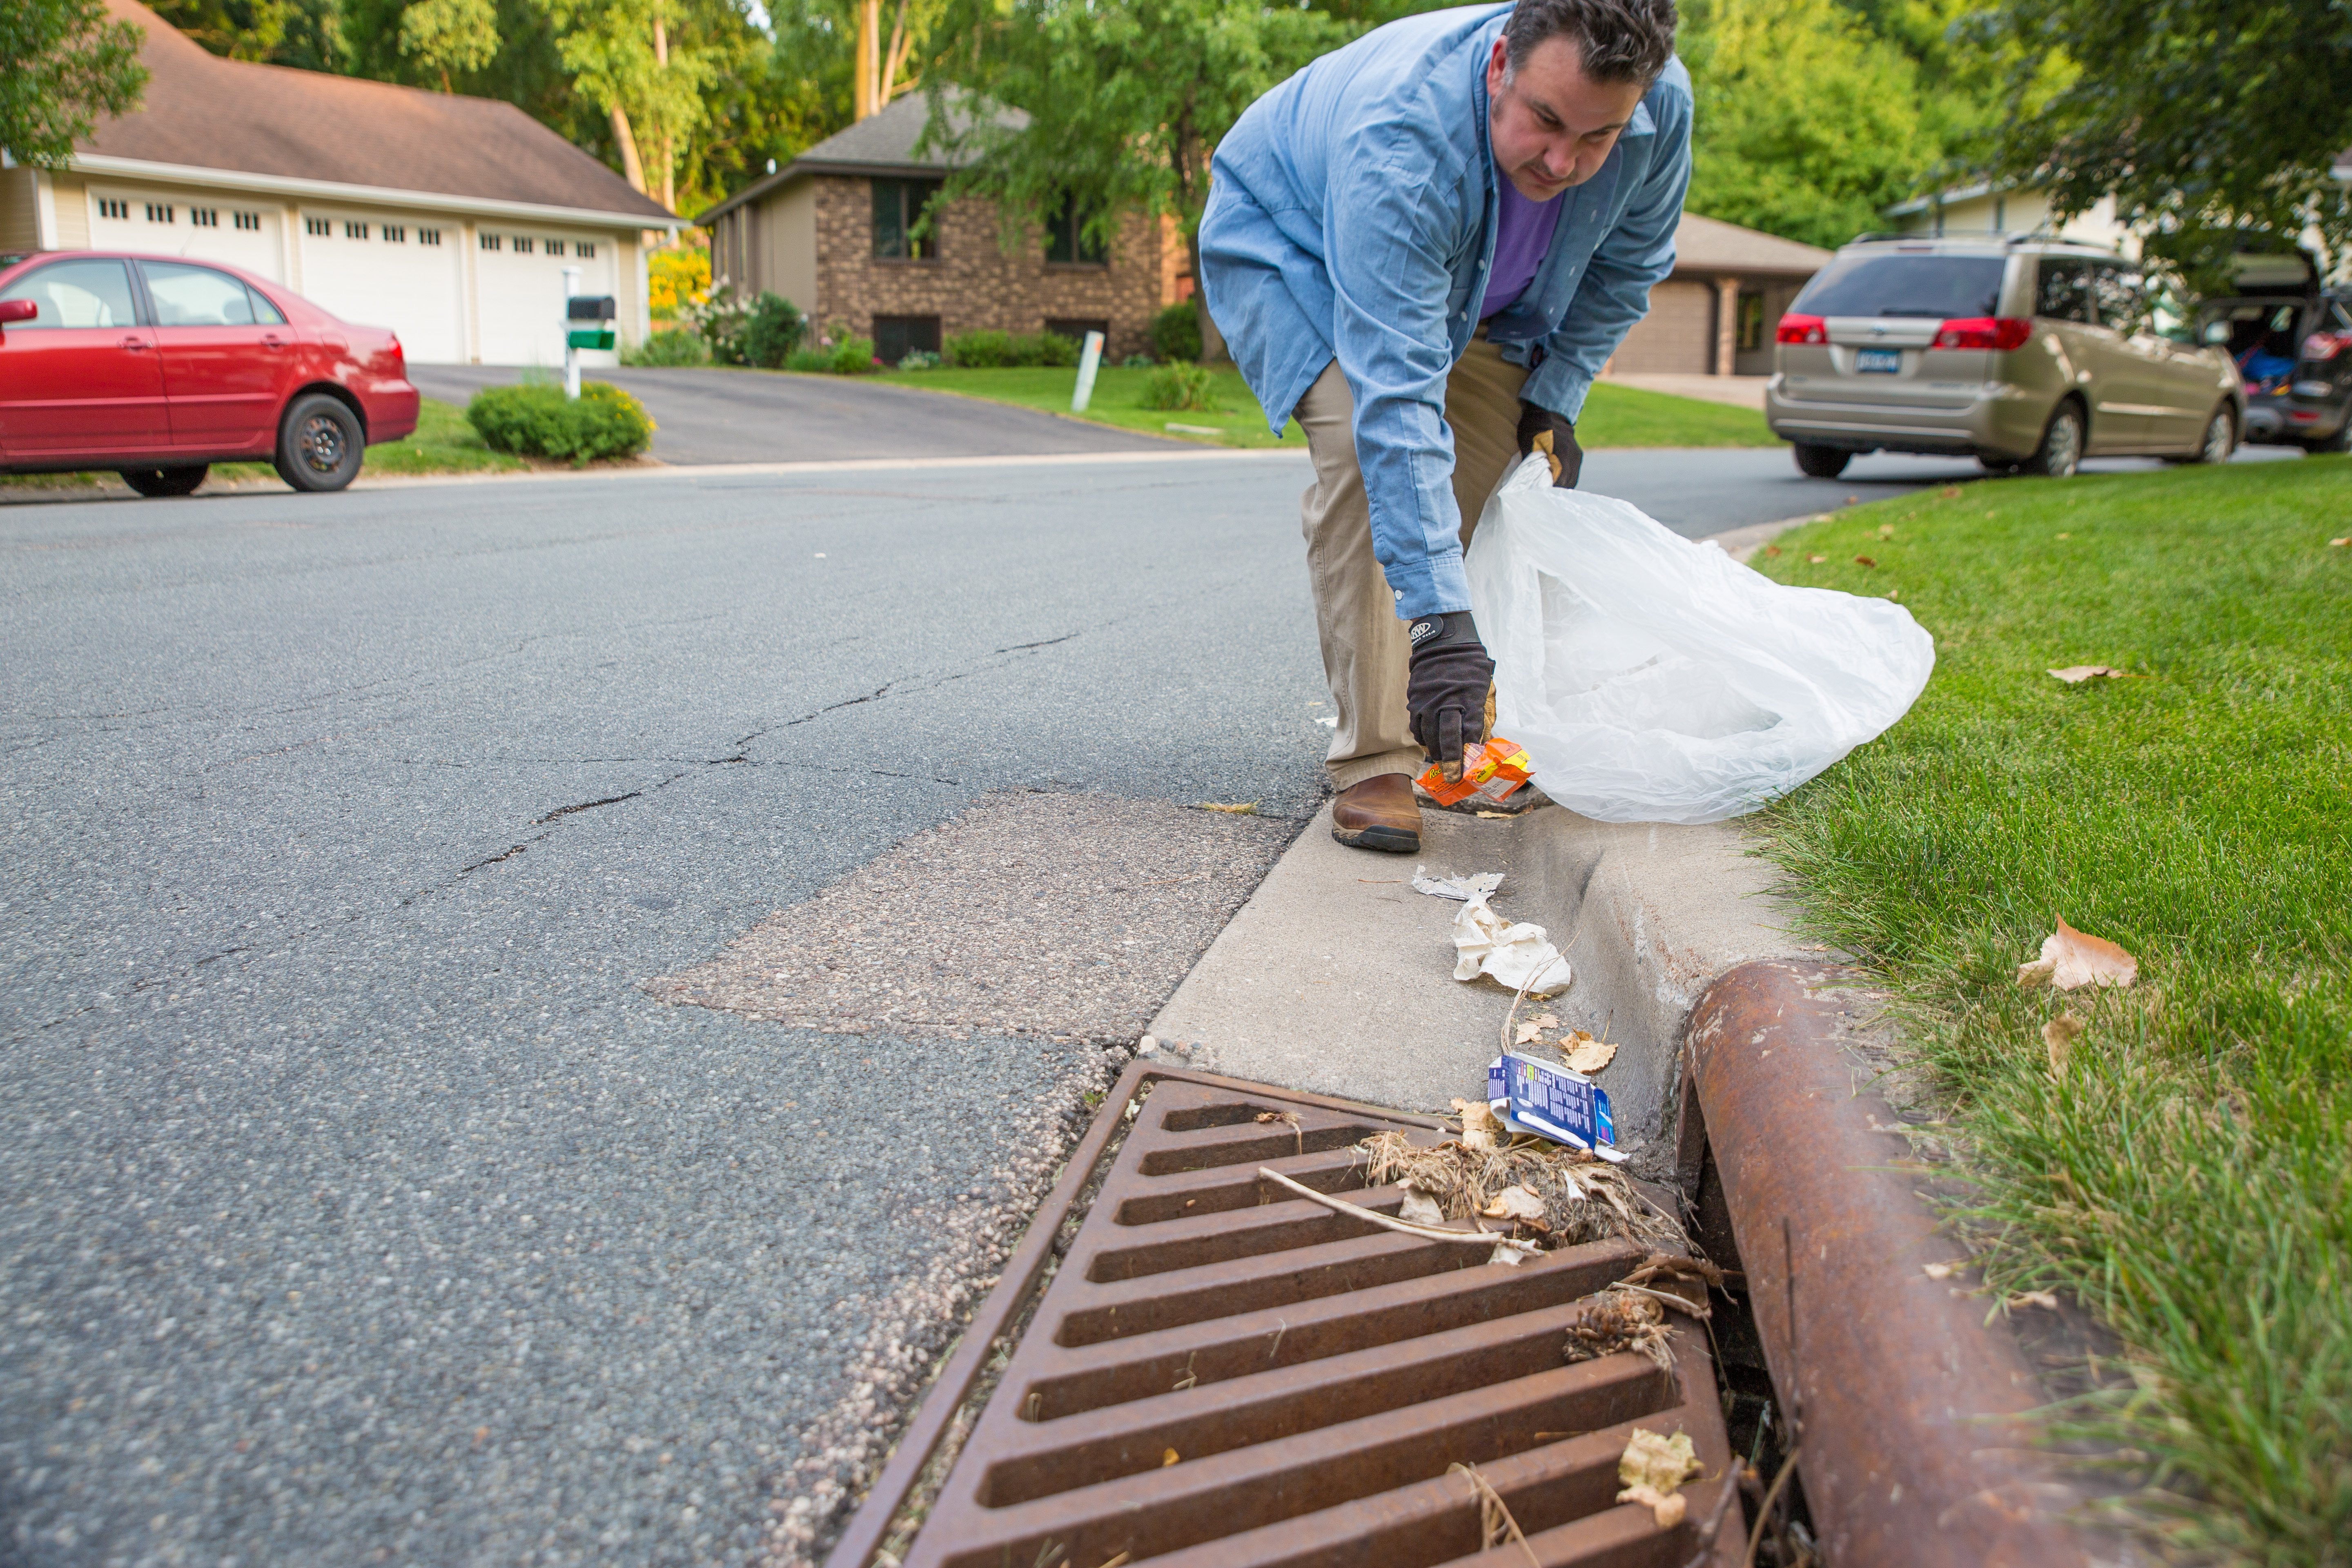 Volunteers ‘Adopt-a-Drain’ to improve urban stormwater management